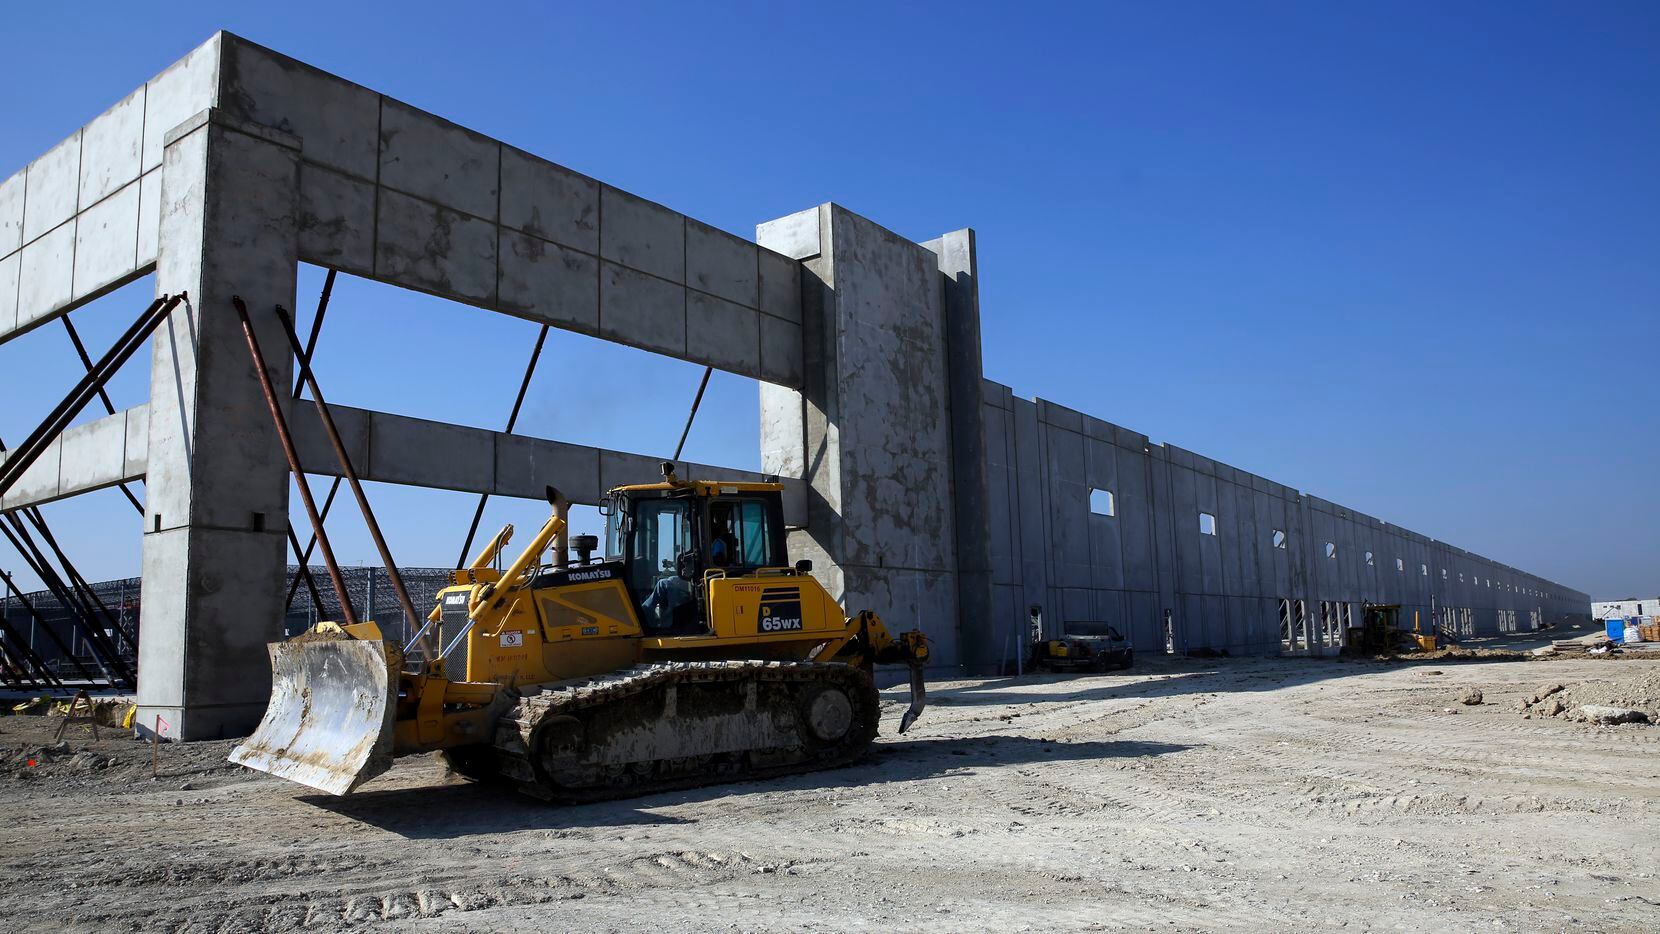 More than 30 million square feet of warehouse space is under construction in North Texas.